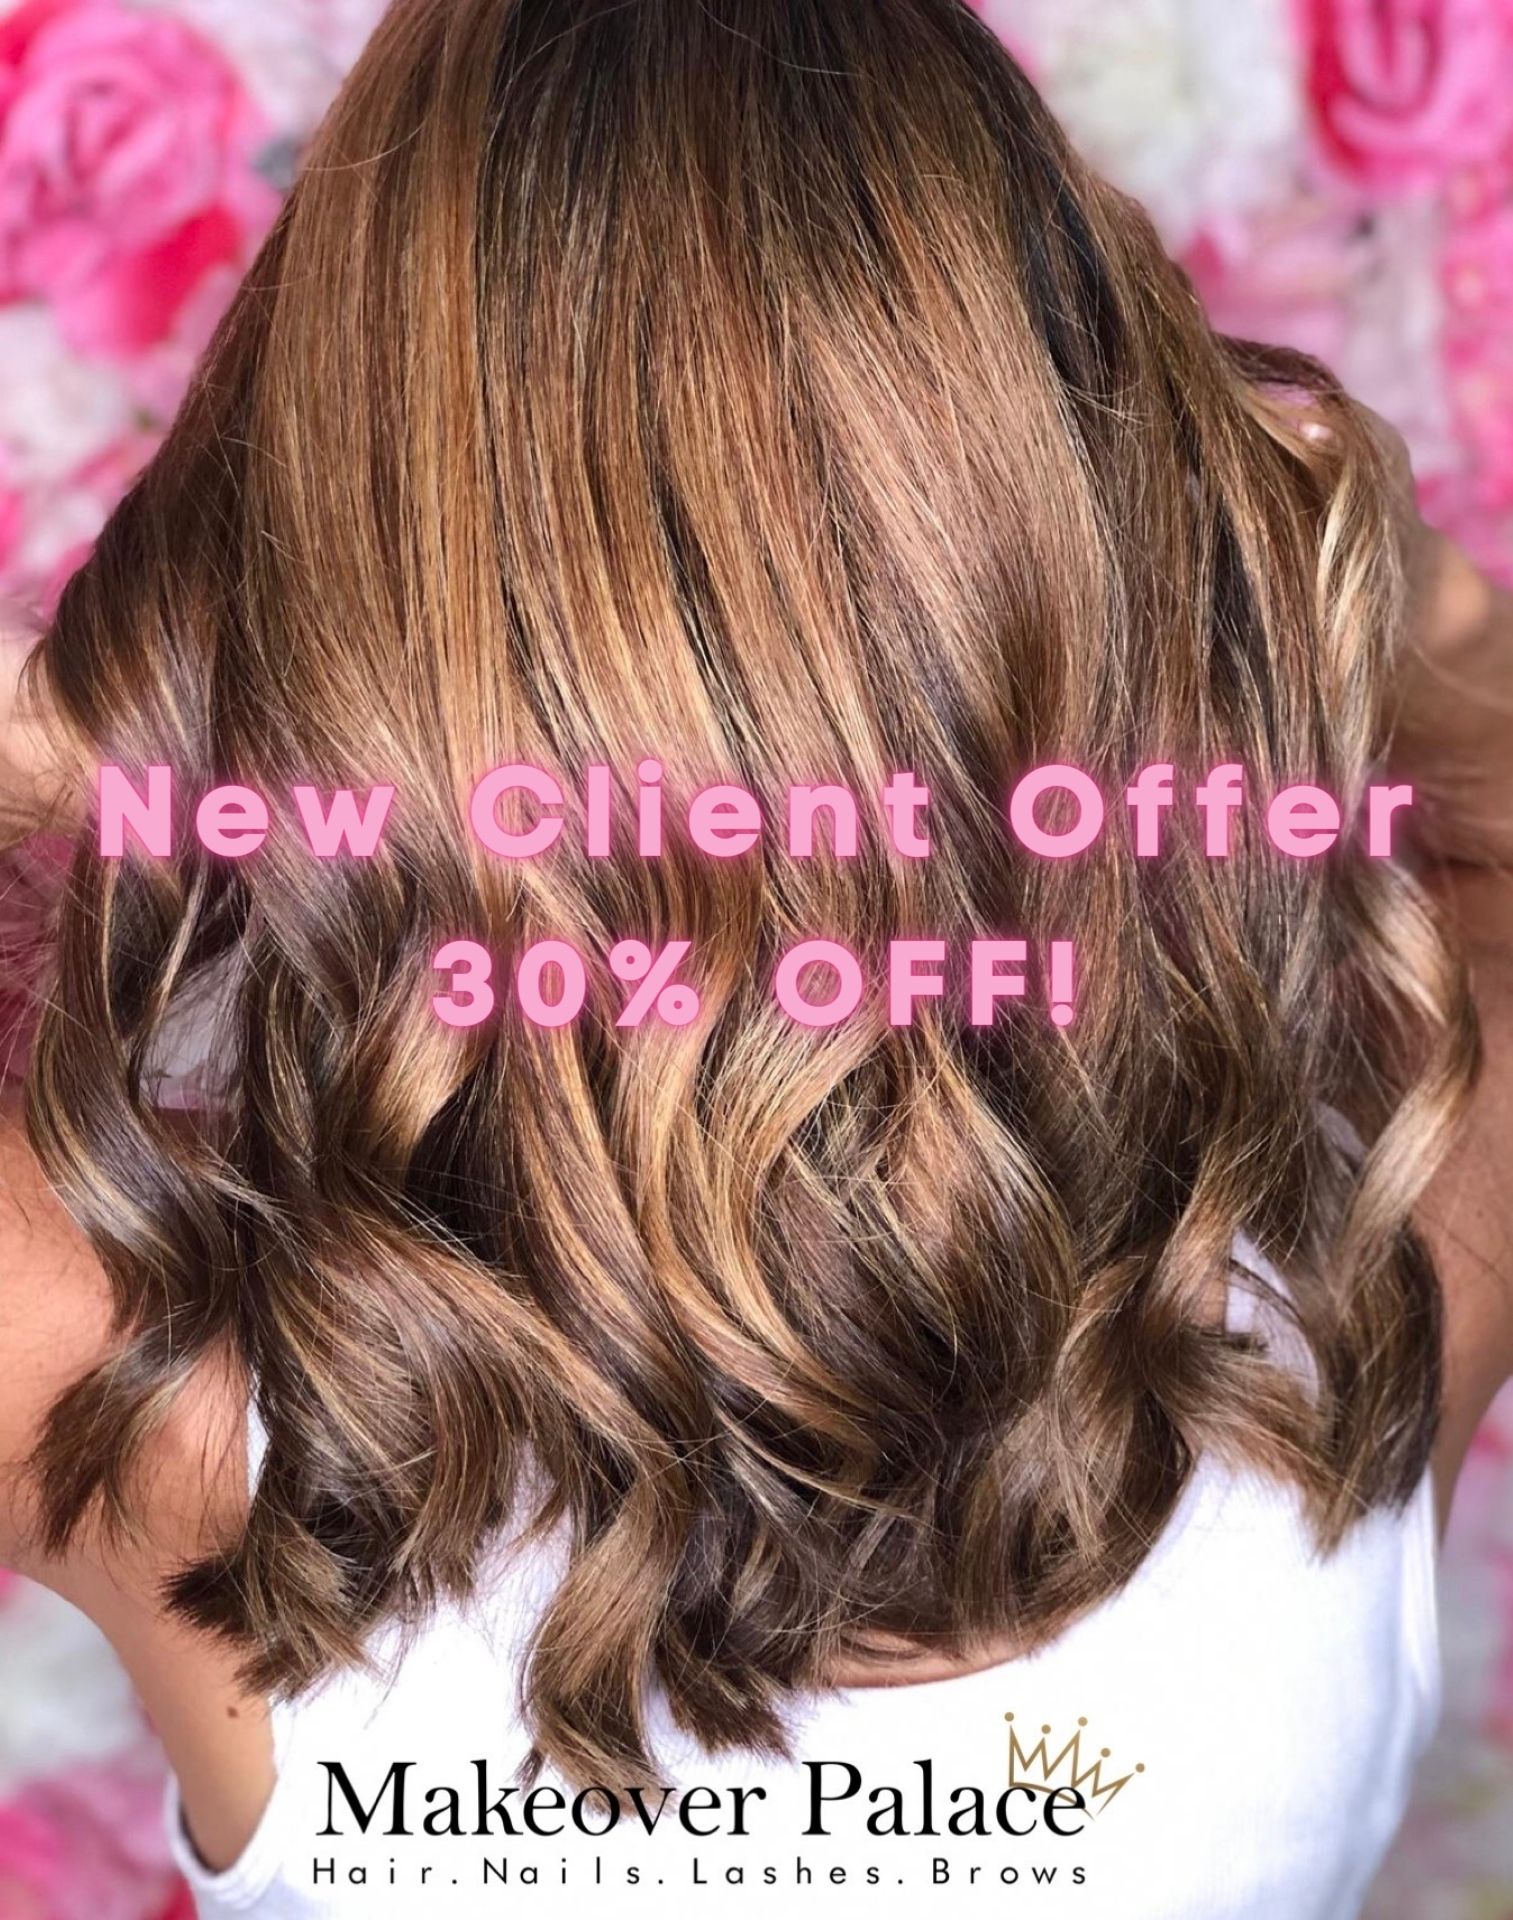 New Client Offer – 30% OFF!